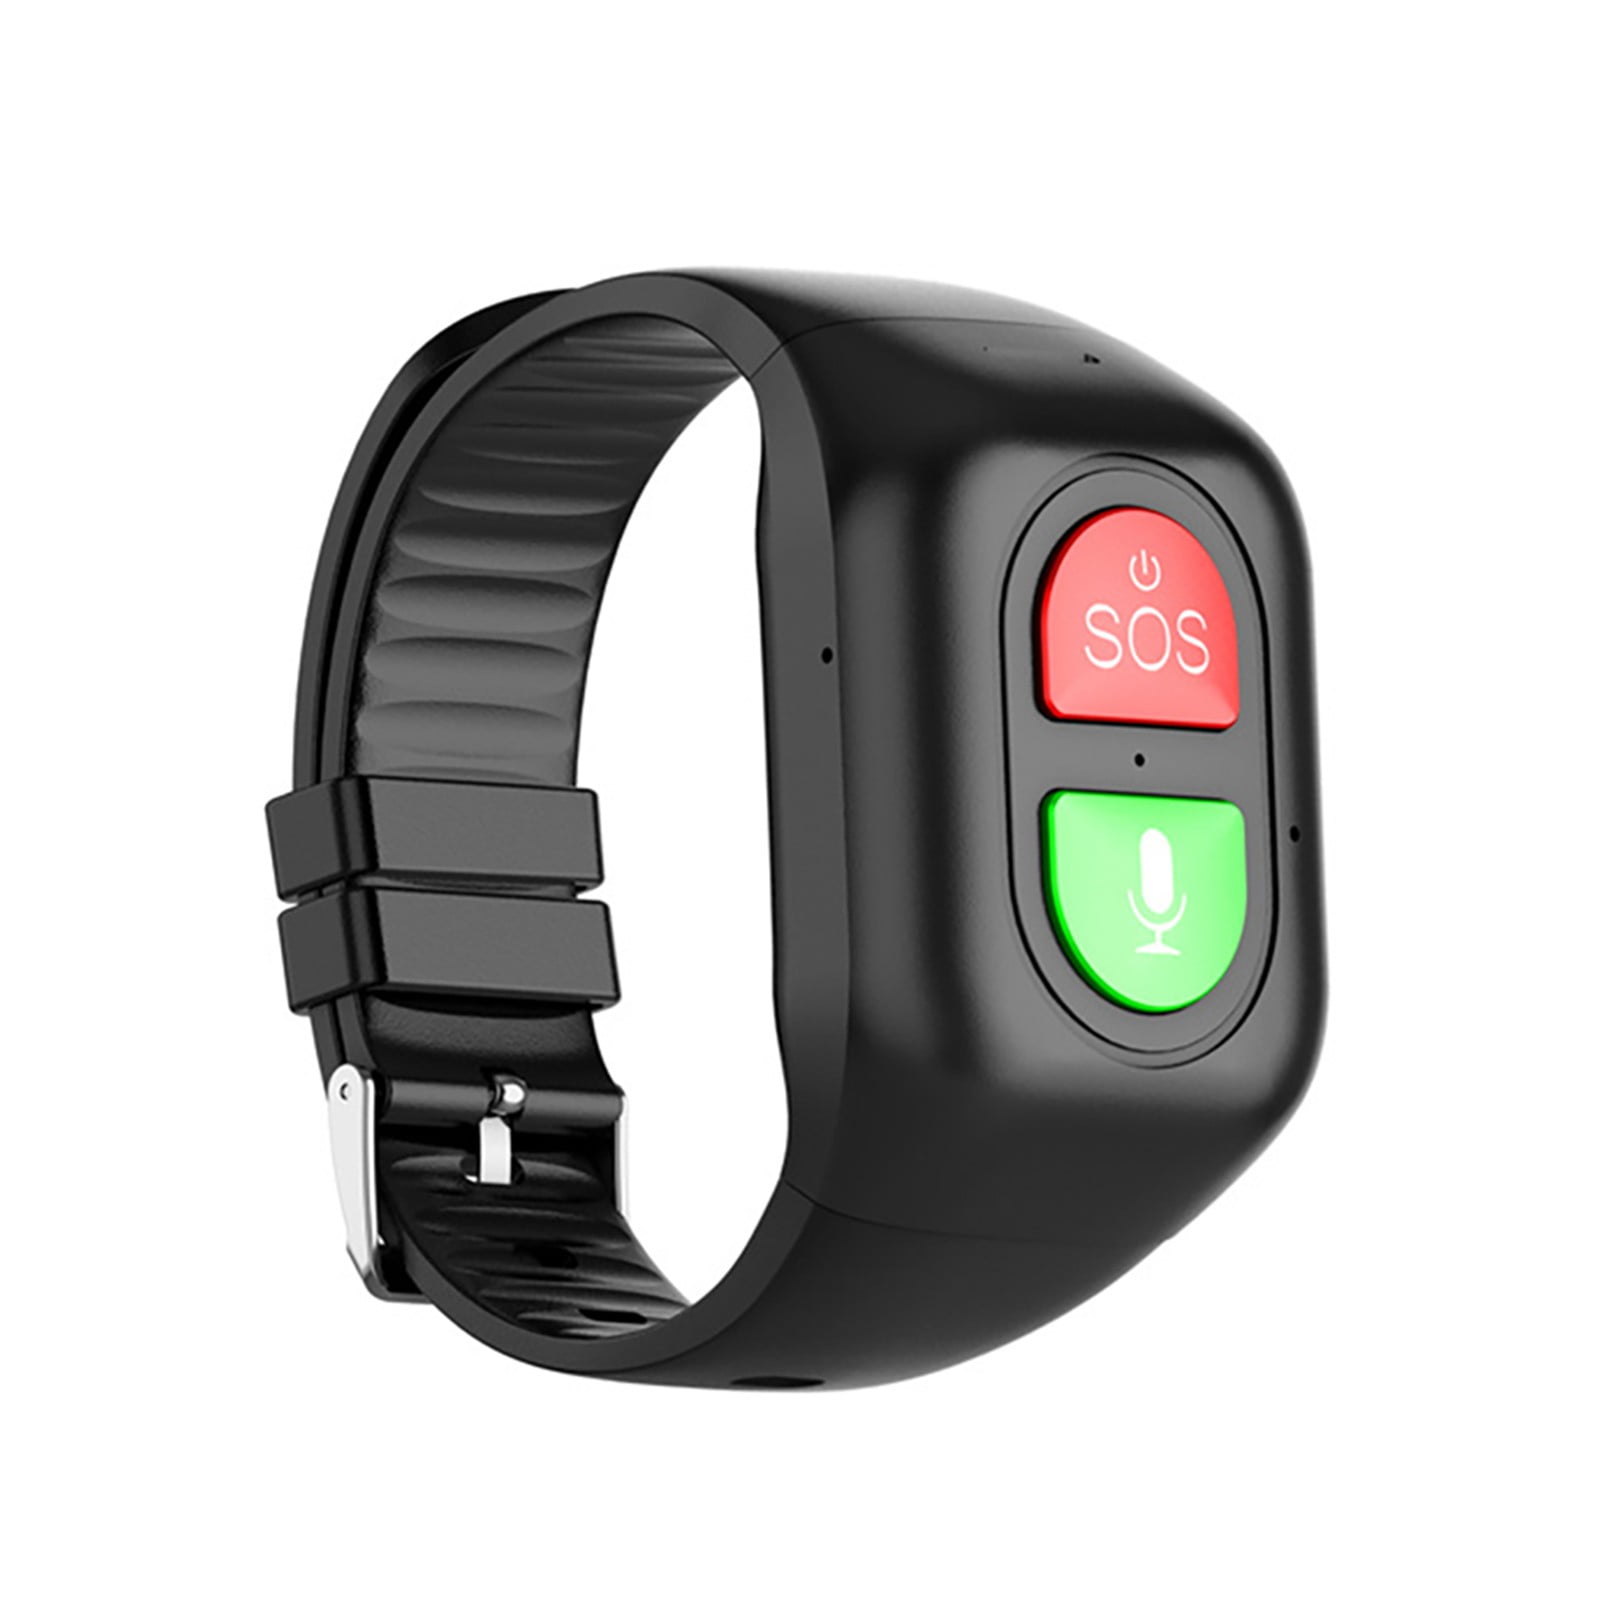 Senior Smart Watch With Fall Detection & GPS (Service Plan)